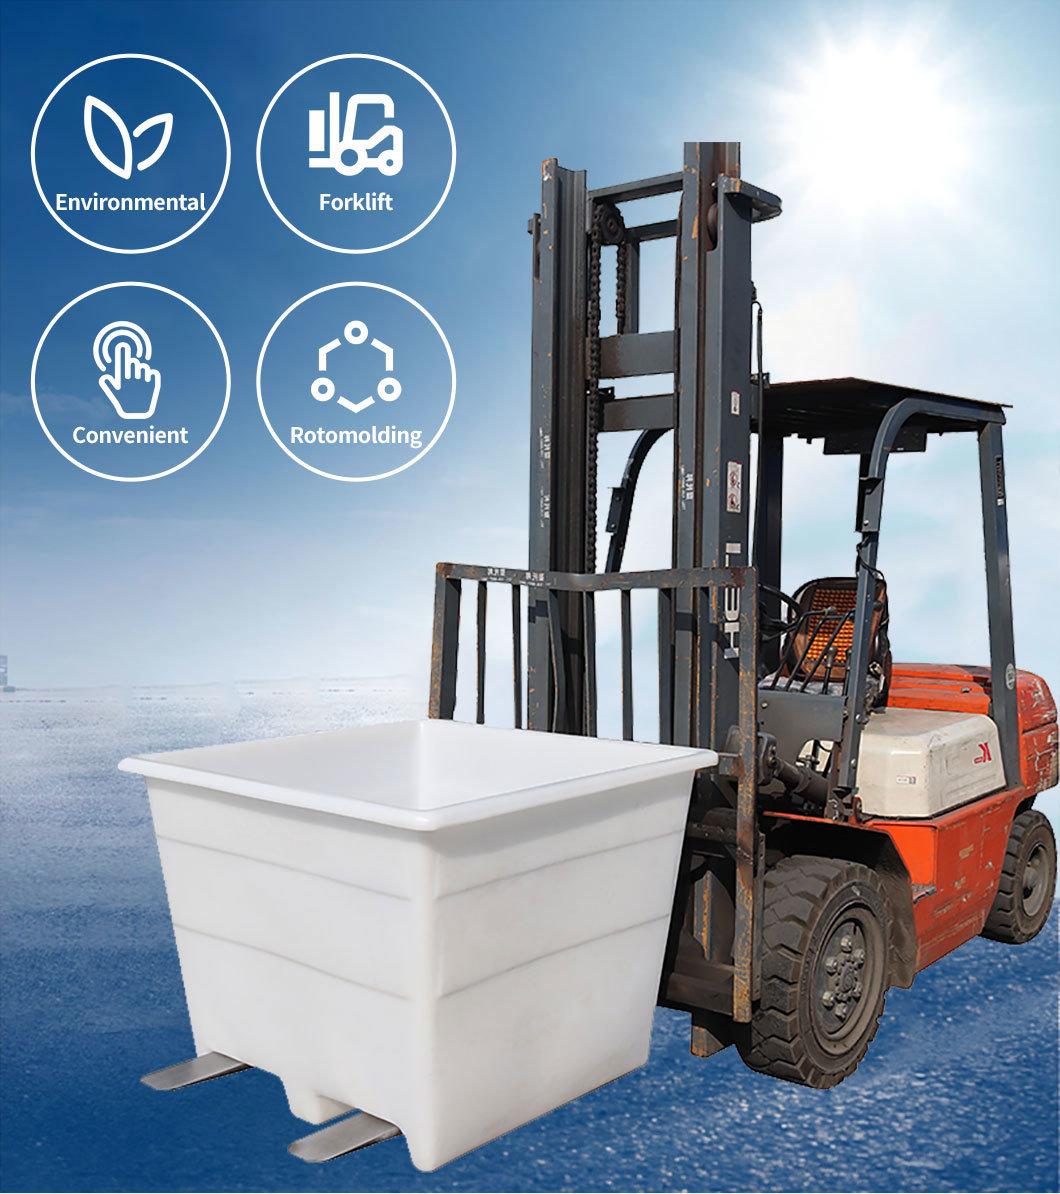 Manufacturers Supply Food Water Turnover Forklift Barrel Plastic Buckets Barrel Thickened Beef Tendon Pickled Round Square Forklift Turnover Plastic Buckets